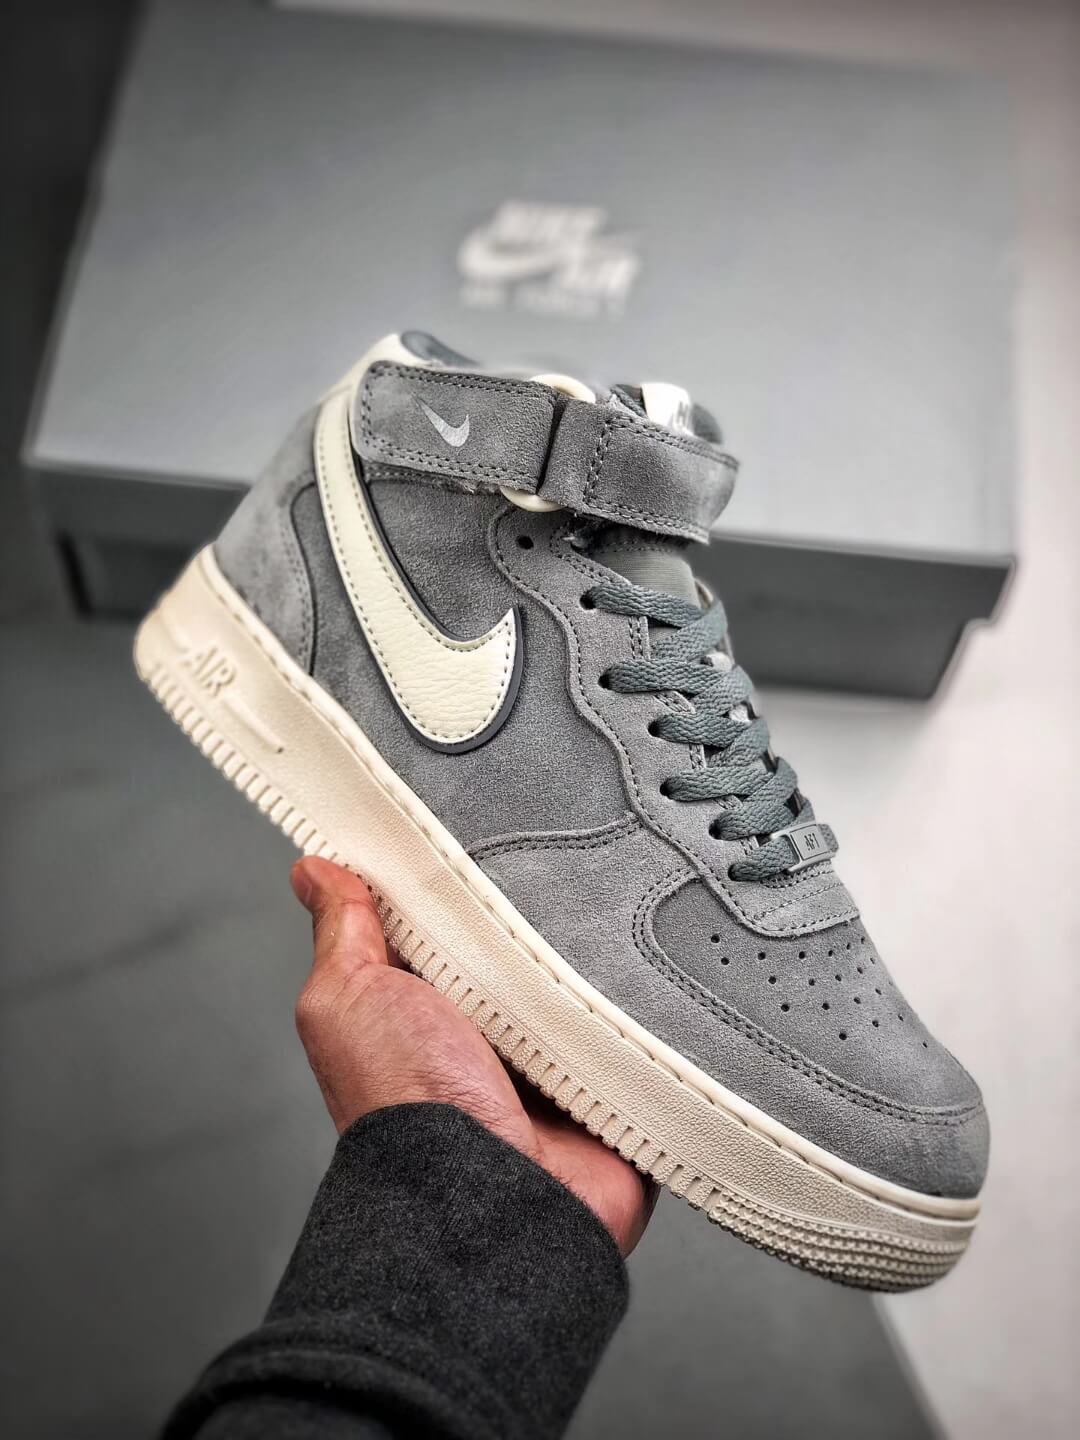 air force 1 mid 07